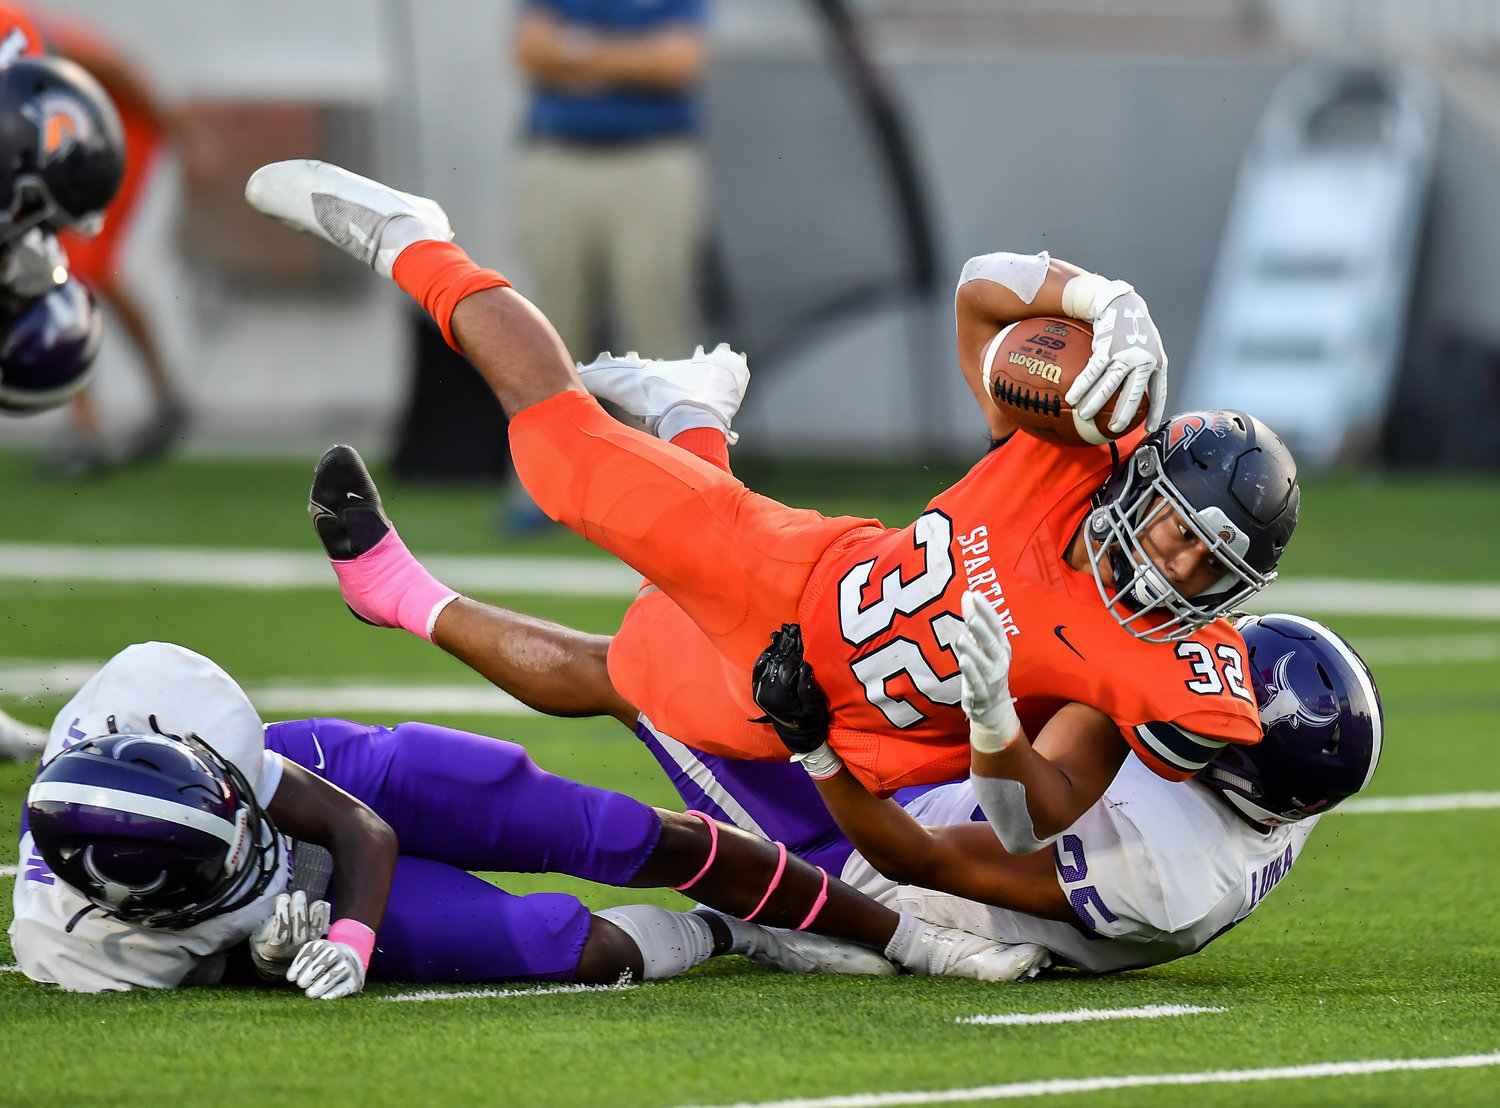 Katy, Tx. Oct. 8, 2021: Seven Lakes Michael Amico #32 dives for the goal line over a couple Morton Ranch defenders scoring a TD during the first half of a District 19-6A game between Seven Lakes and Morton Ranch at Legacy Stadium in Katy. (Photo by Mark Goodman / Katy Times)